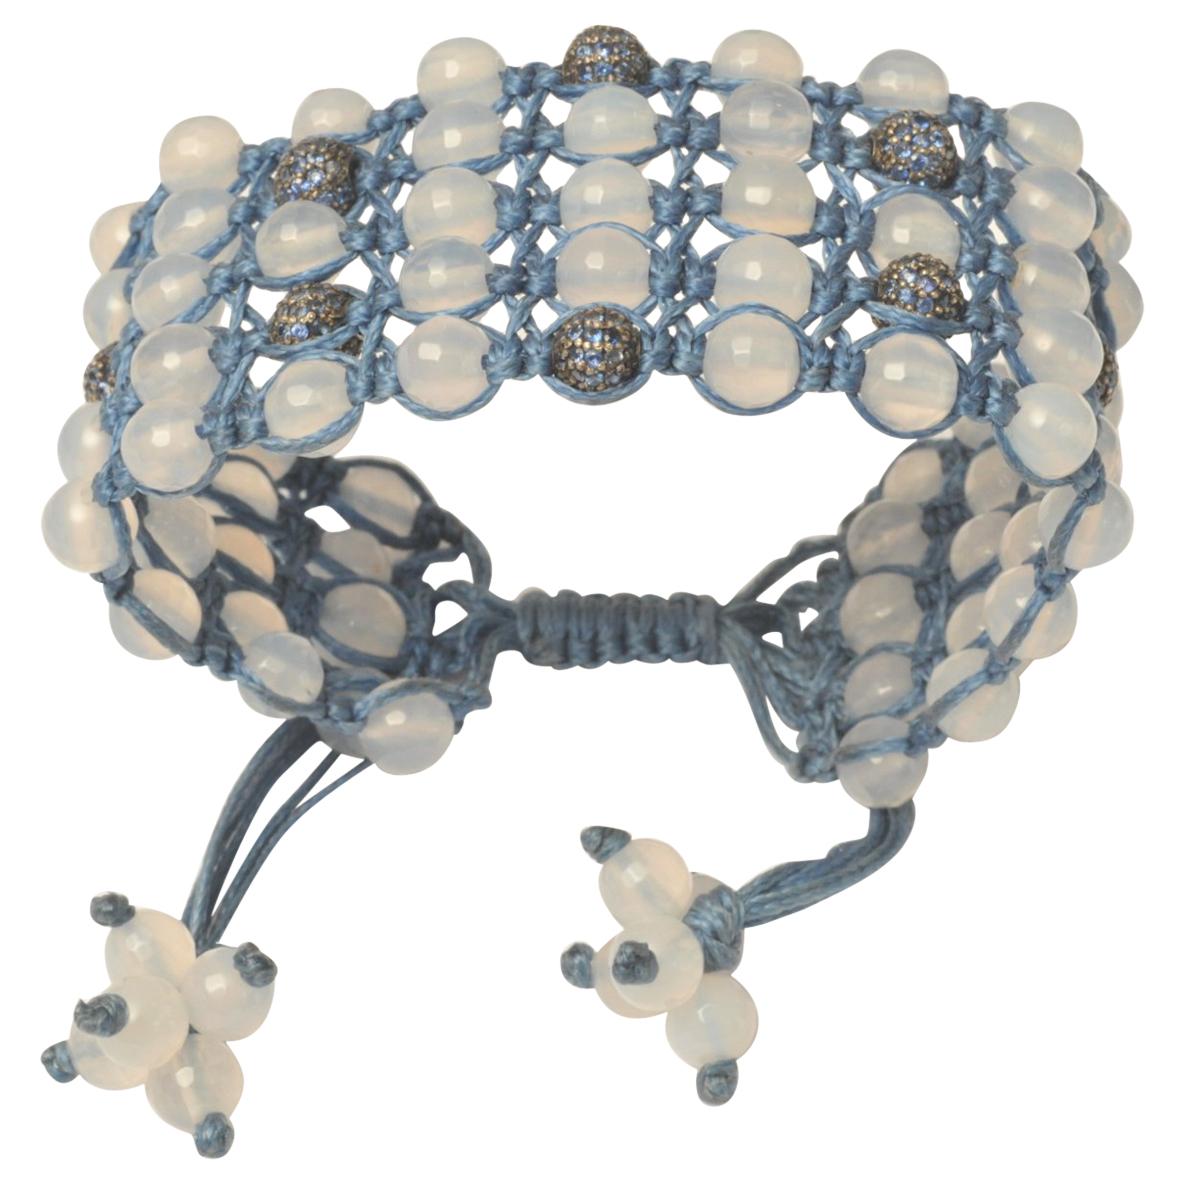 Woven Blue Sapphire and Chalcedony Beaded Bracelet